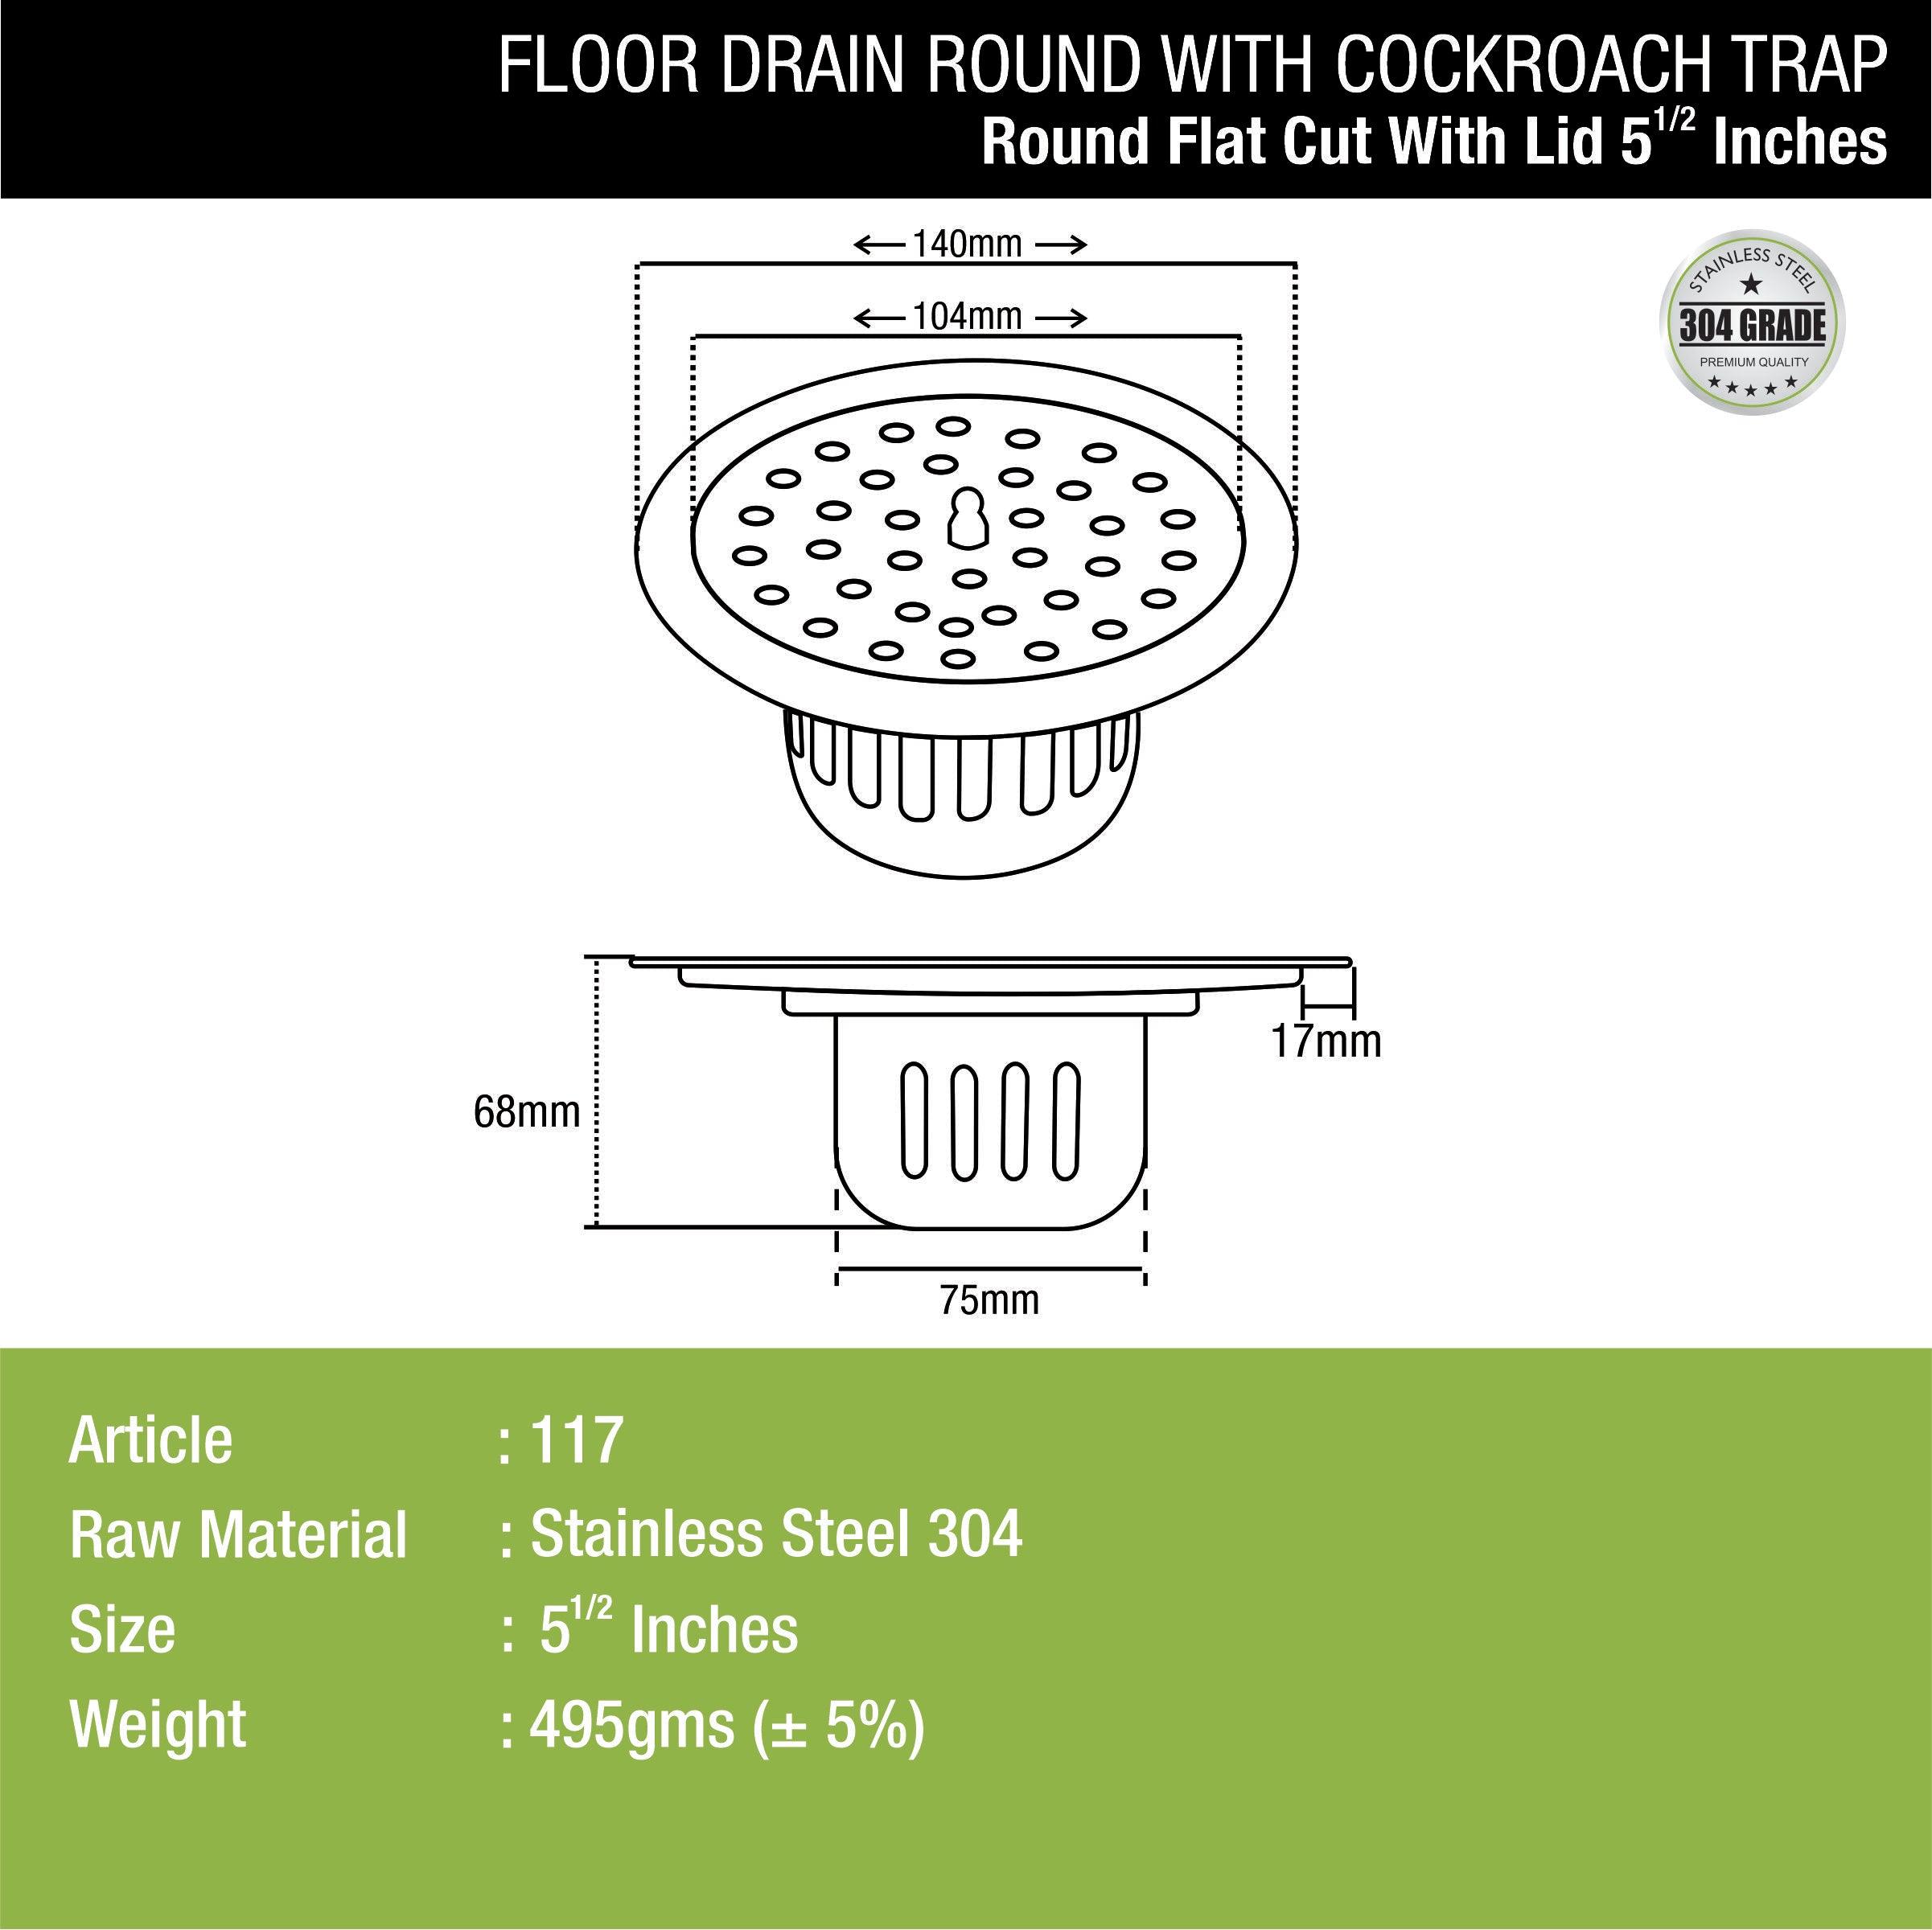 Round Flat Cut Floor Drain (5.5 inches) with Cockroach Trap & Lid dimensions and sizes